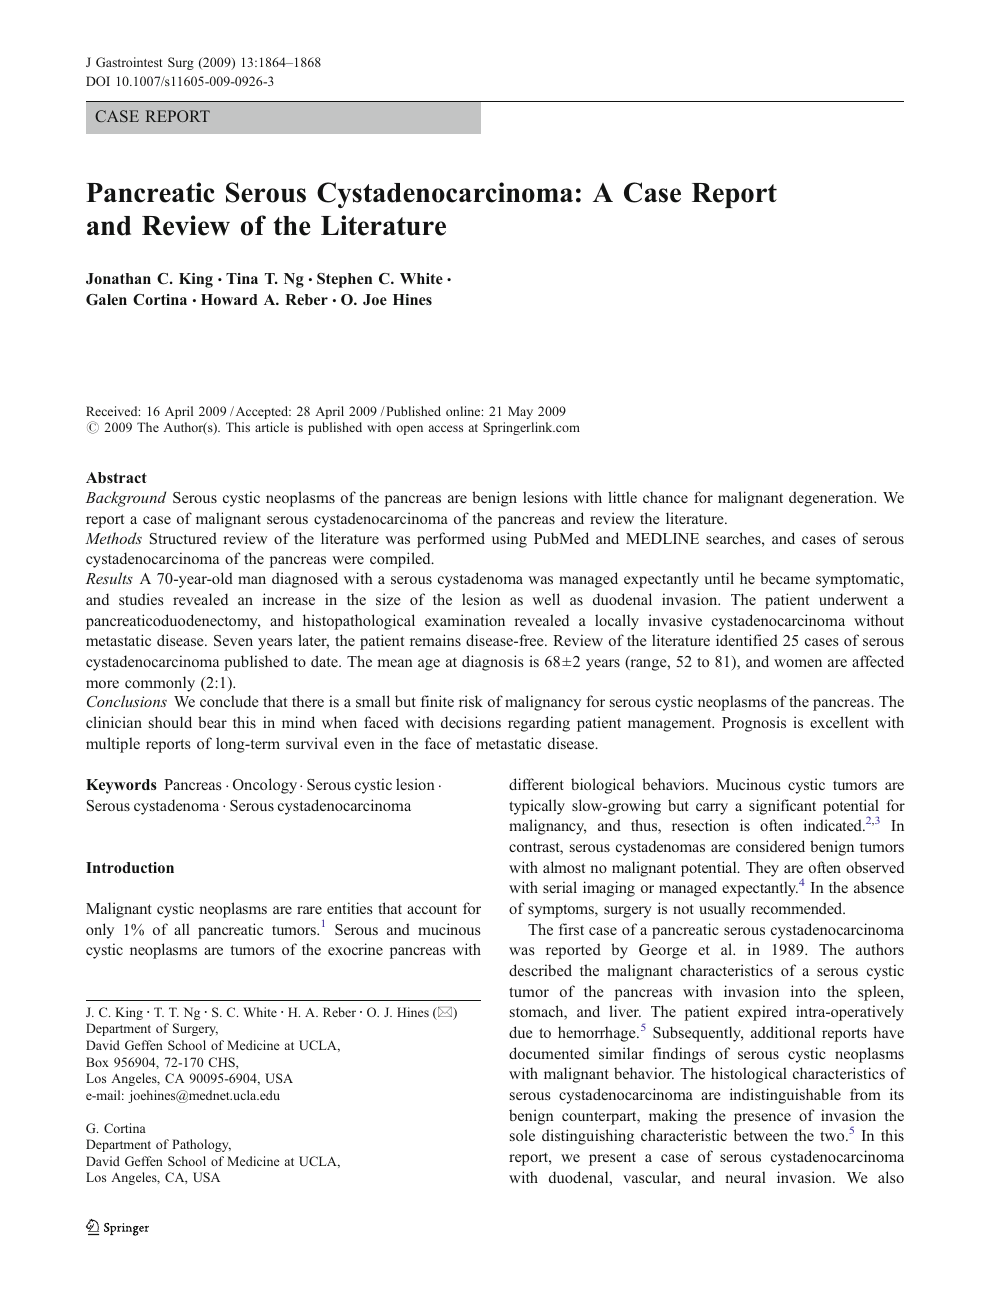 Pancreatic Serous Cystadenocarcinoma A Case Report And Review Of The Literature Topic Of Research Paper In Clinical Medicine Download Scholarly Article Pdf And Read For Free On Cyberleninka Open Science Hub